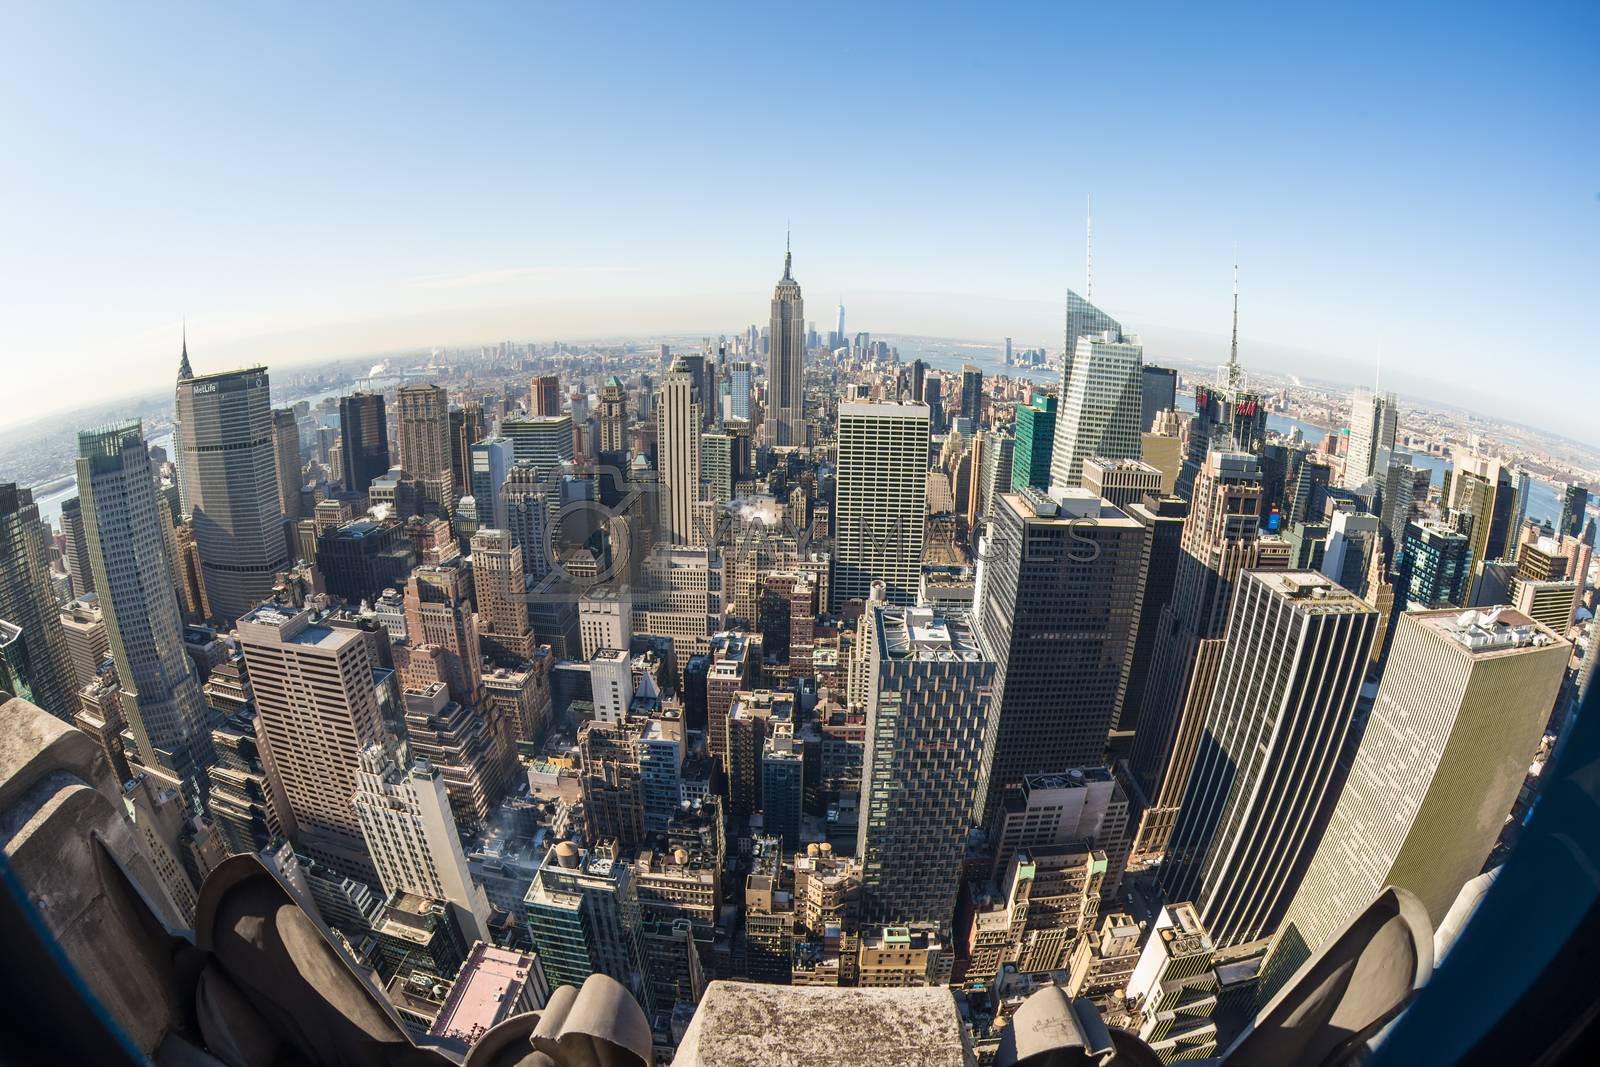 New York City, United States of America - March 24: Manhattan downtown skyline with Empire State Building and skyscrapers seen from Top of the Rock observation deck on March 24, 2015.